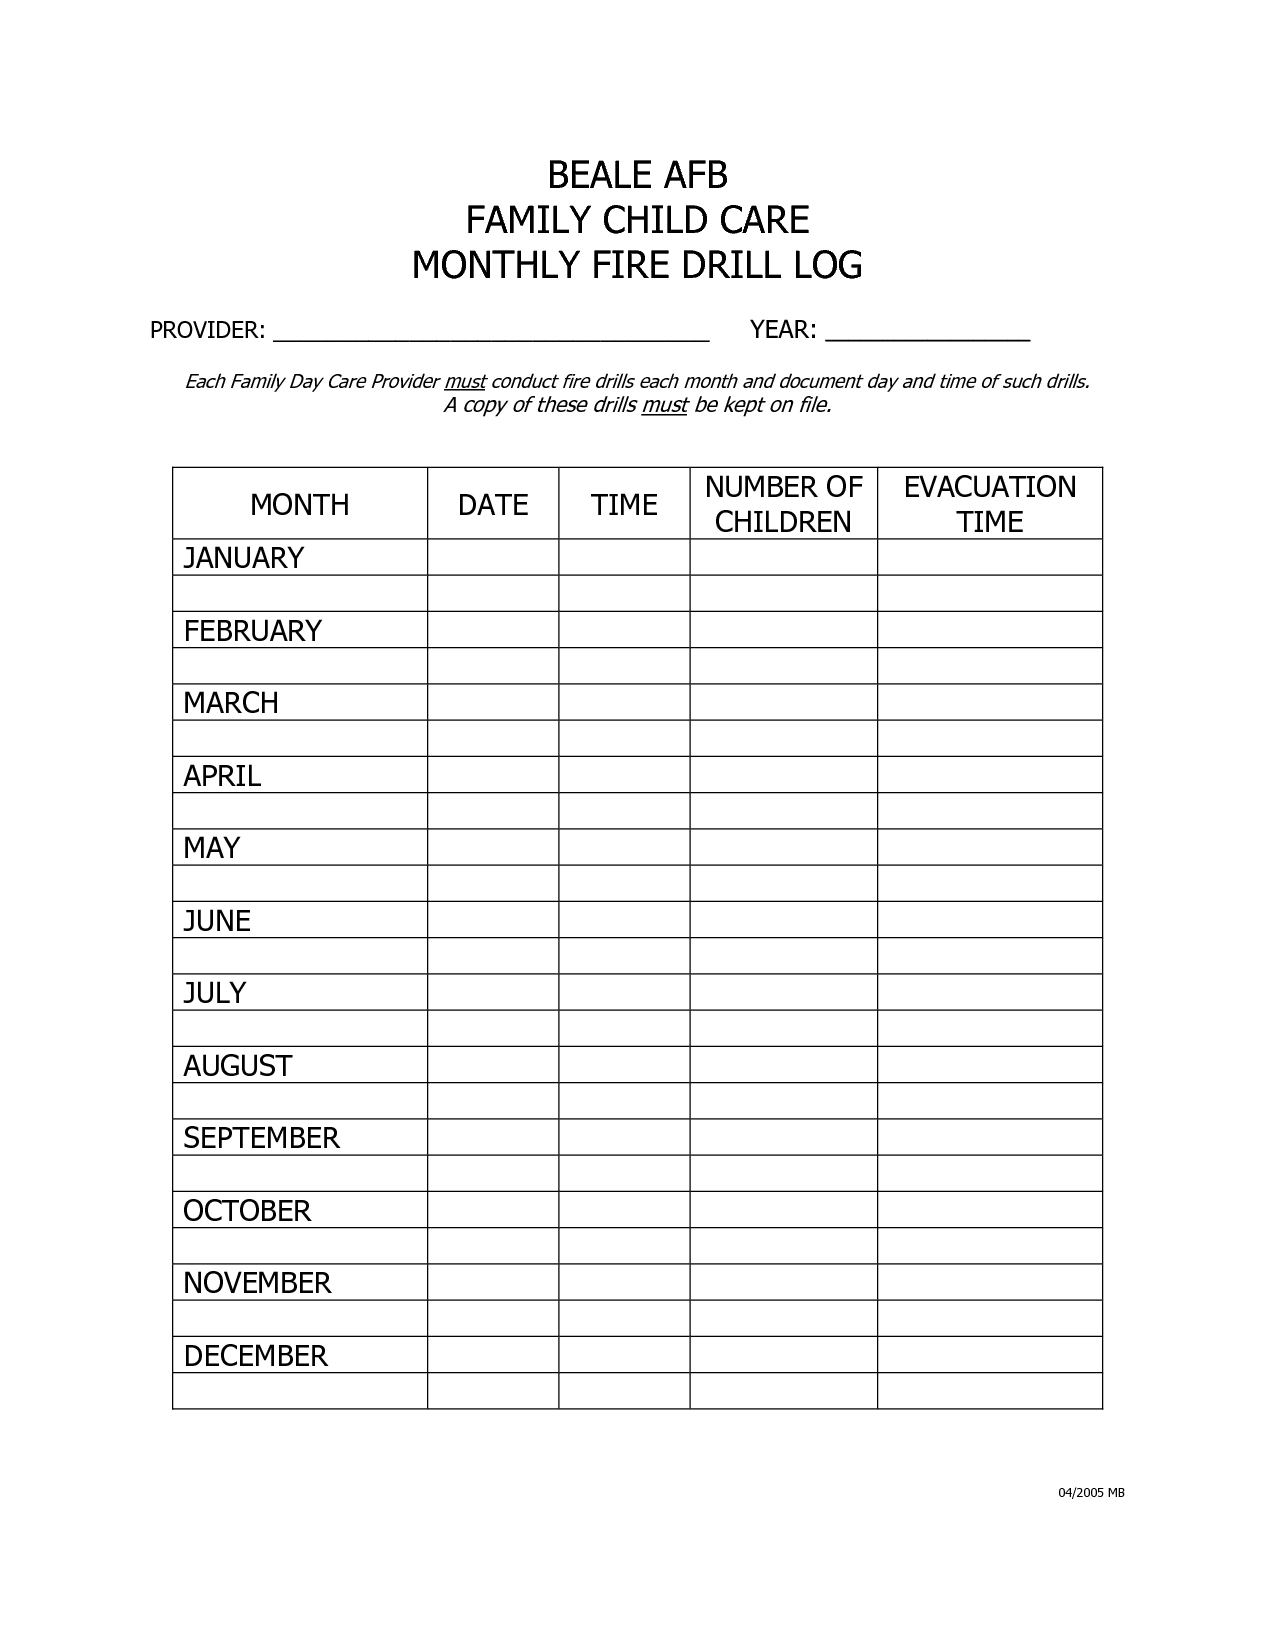 Image Result For Fire Drill Log Template | Fire Drill Within Emergency Drill Report Template